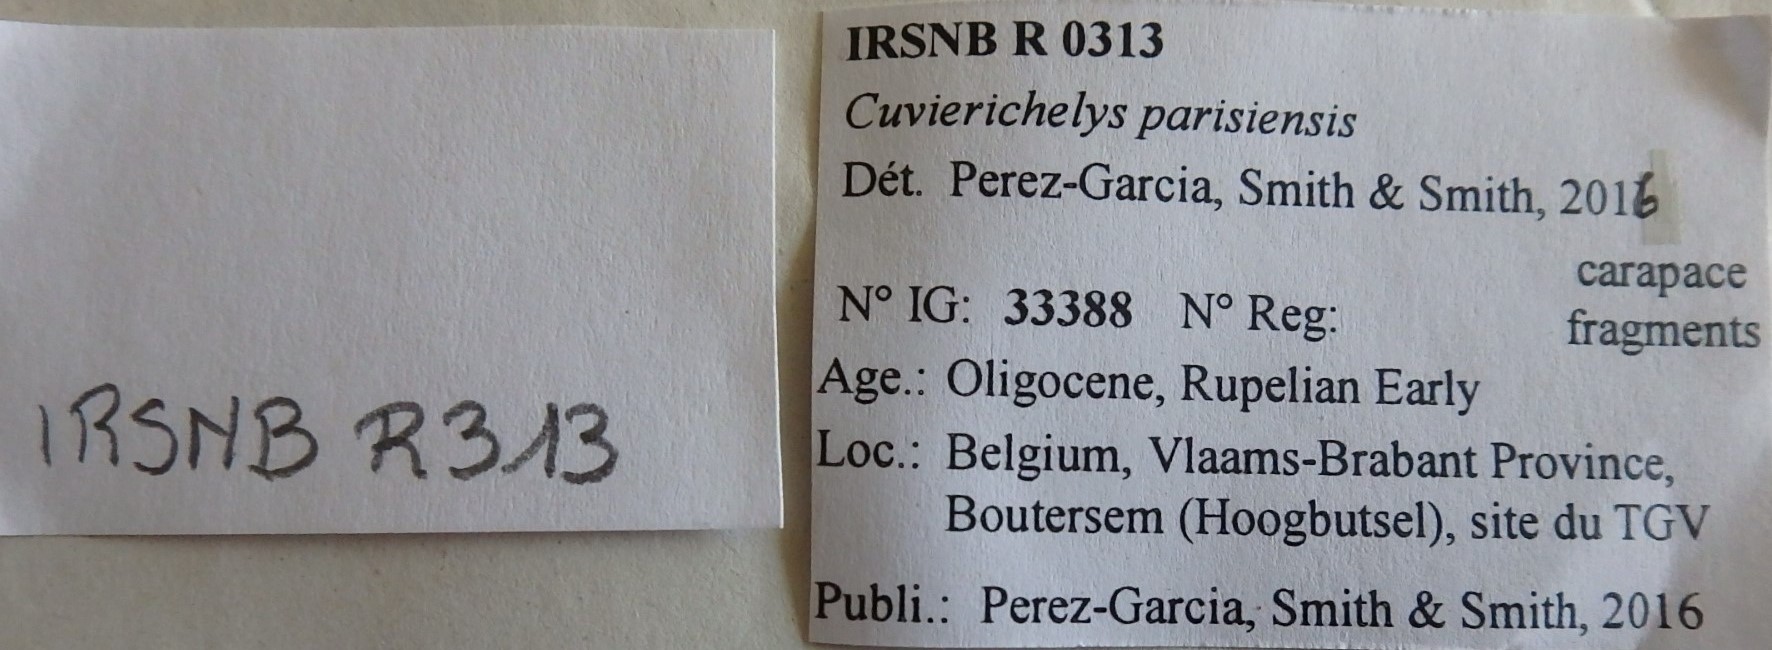 IRSNB R 0313 Labels